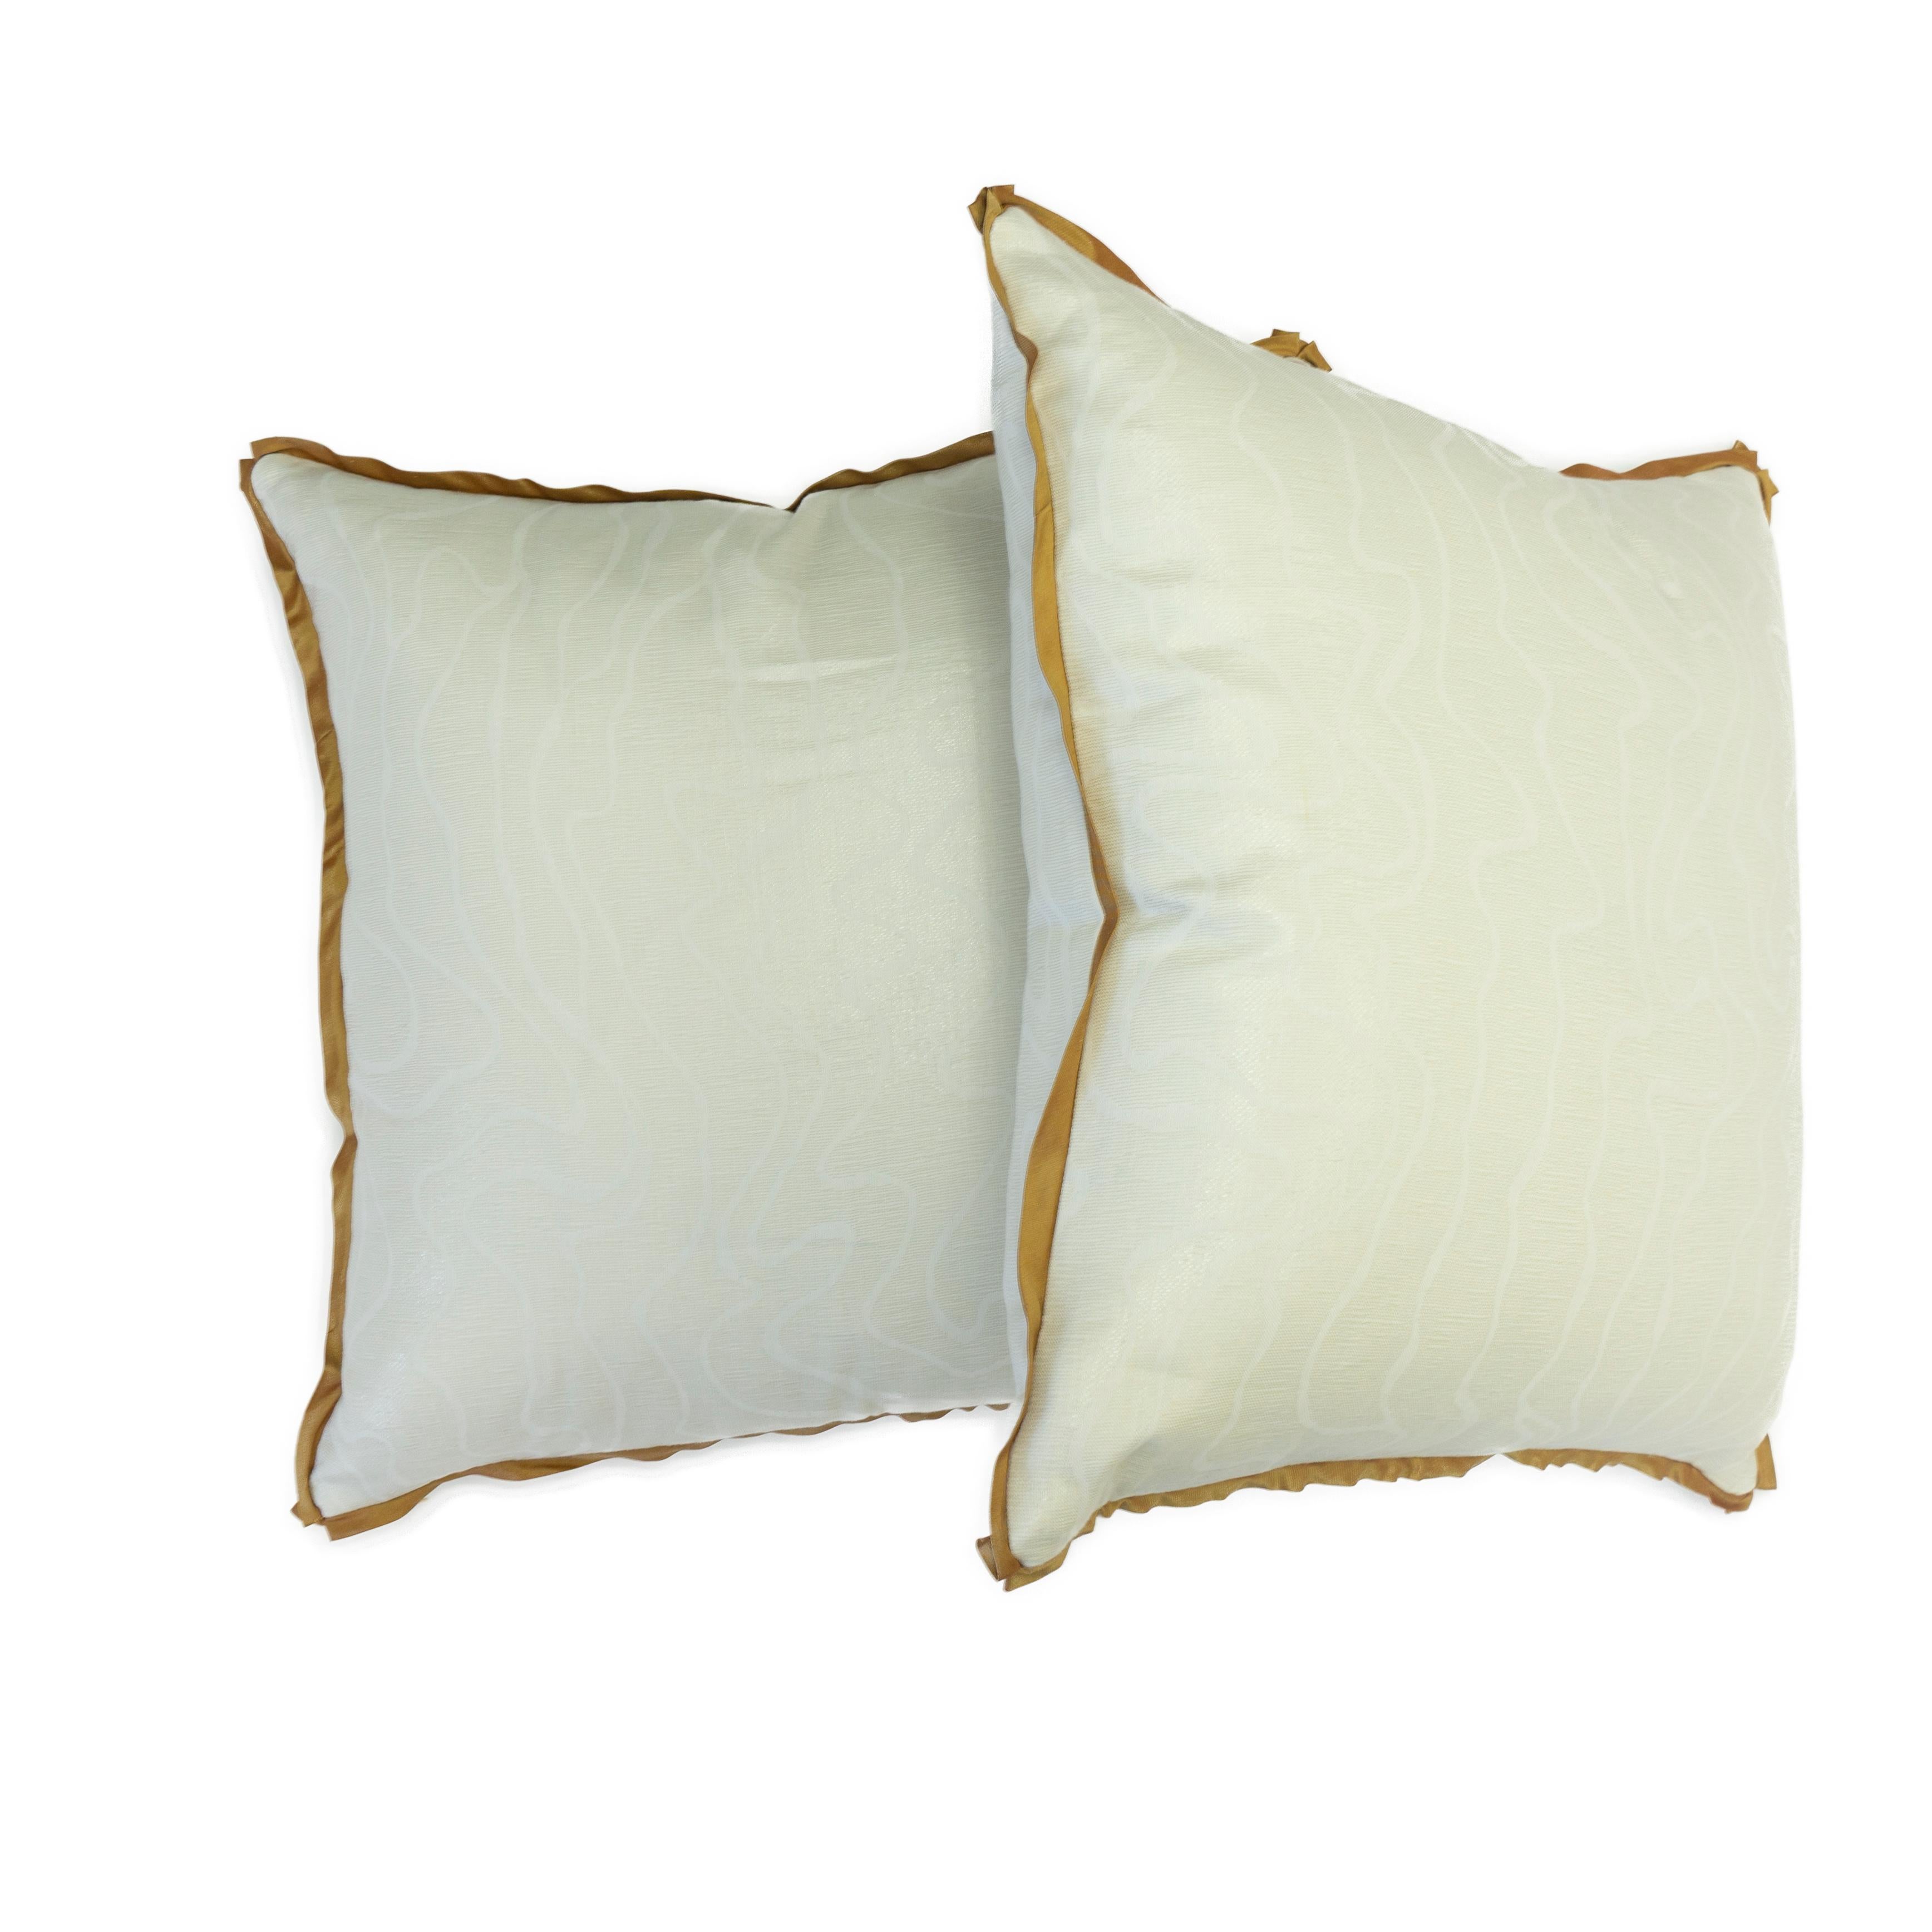 These shimmering pillows were hand sewn in a sheer linen fabric with lurex featuring an asymmetrical design with contour lines. The silk trim features neatly folded 